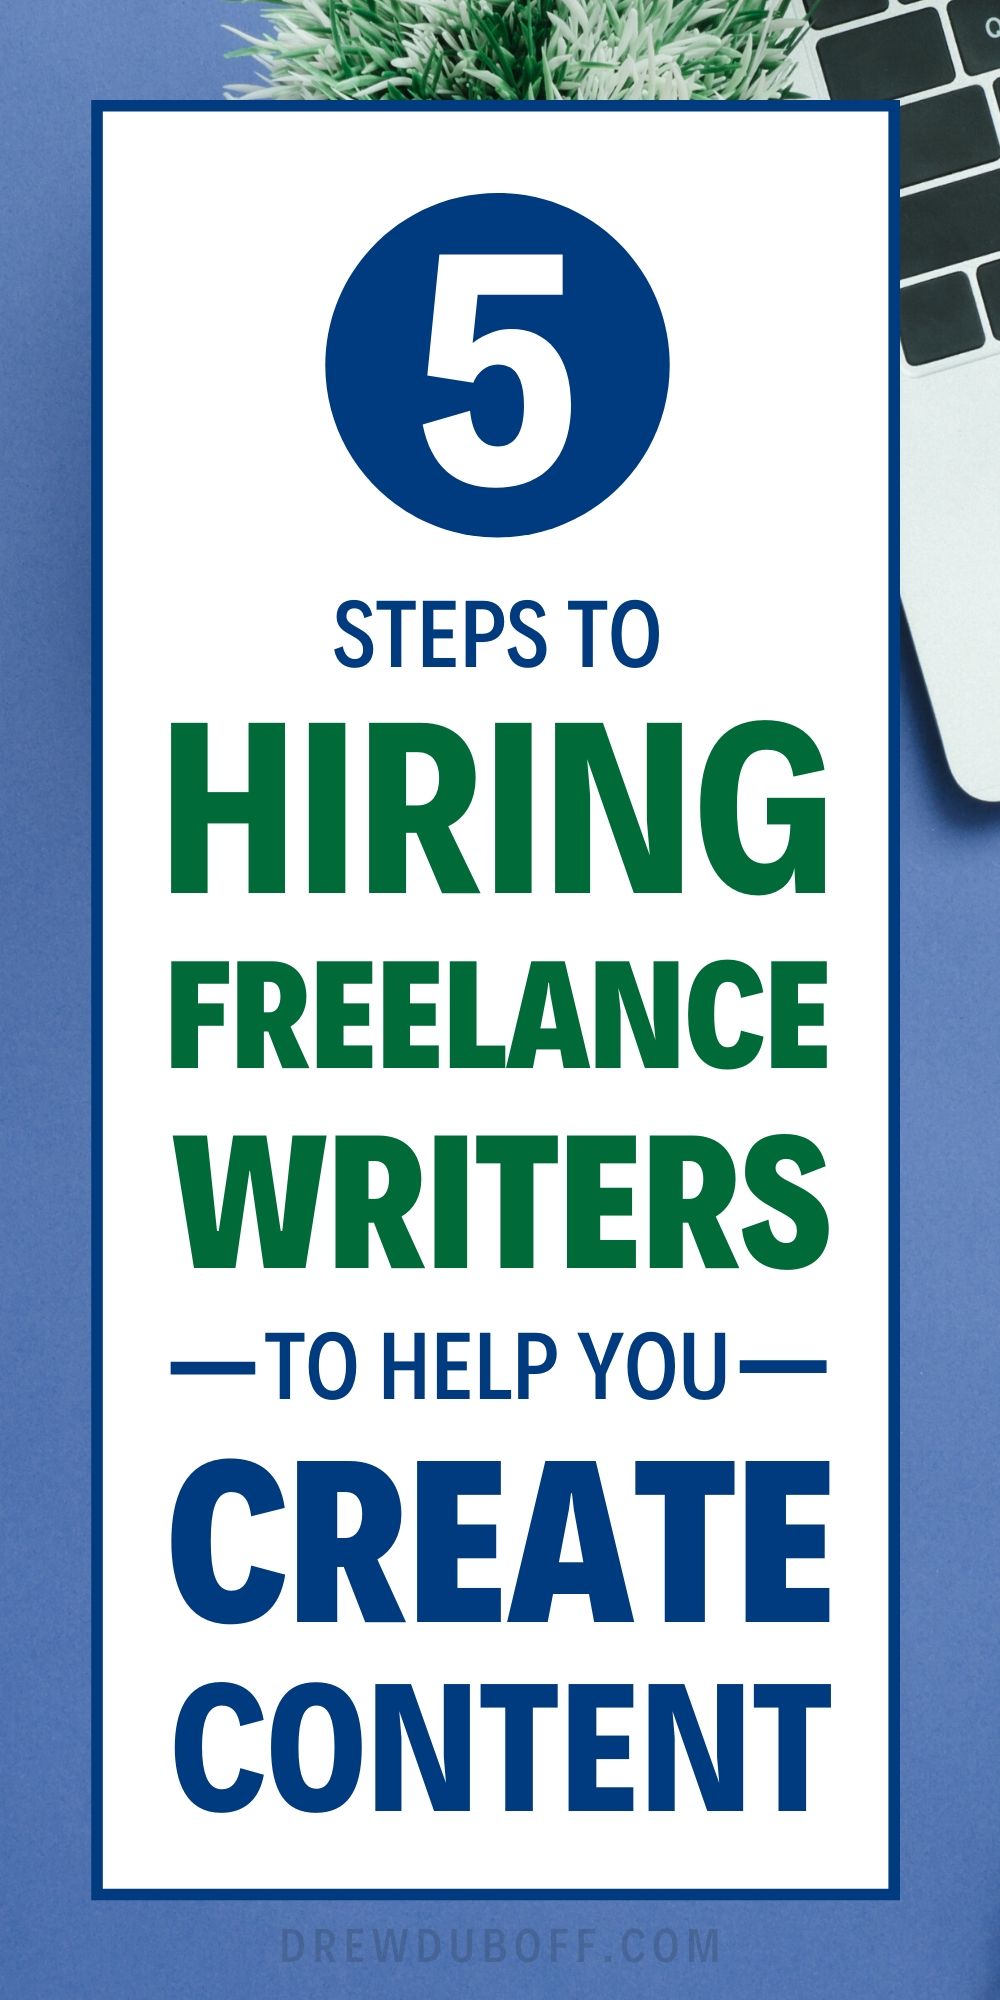 5 Steps to Hiring Freelance Writers to Help You Create Content